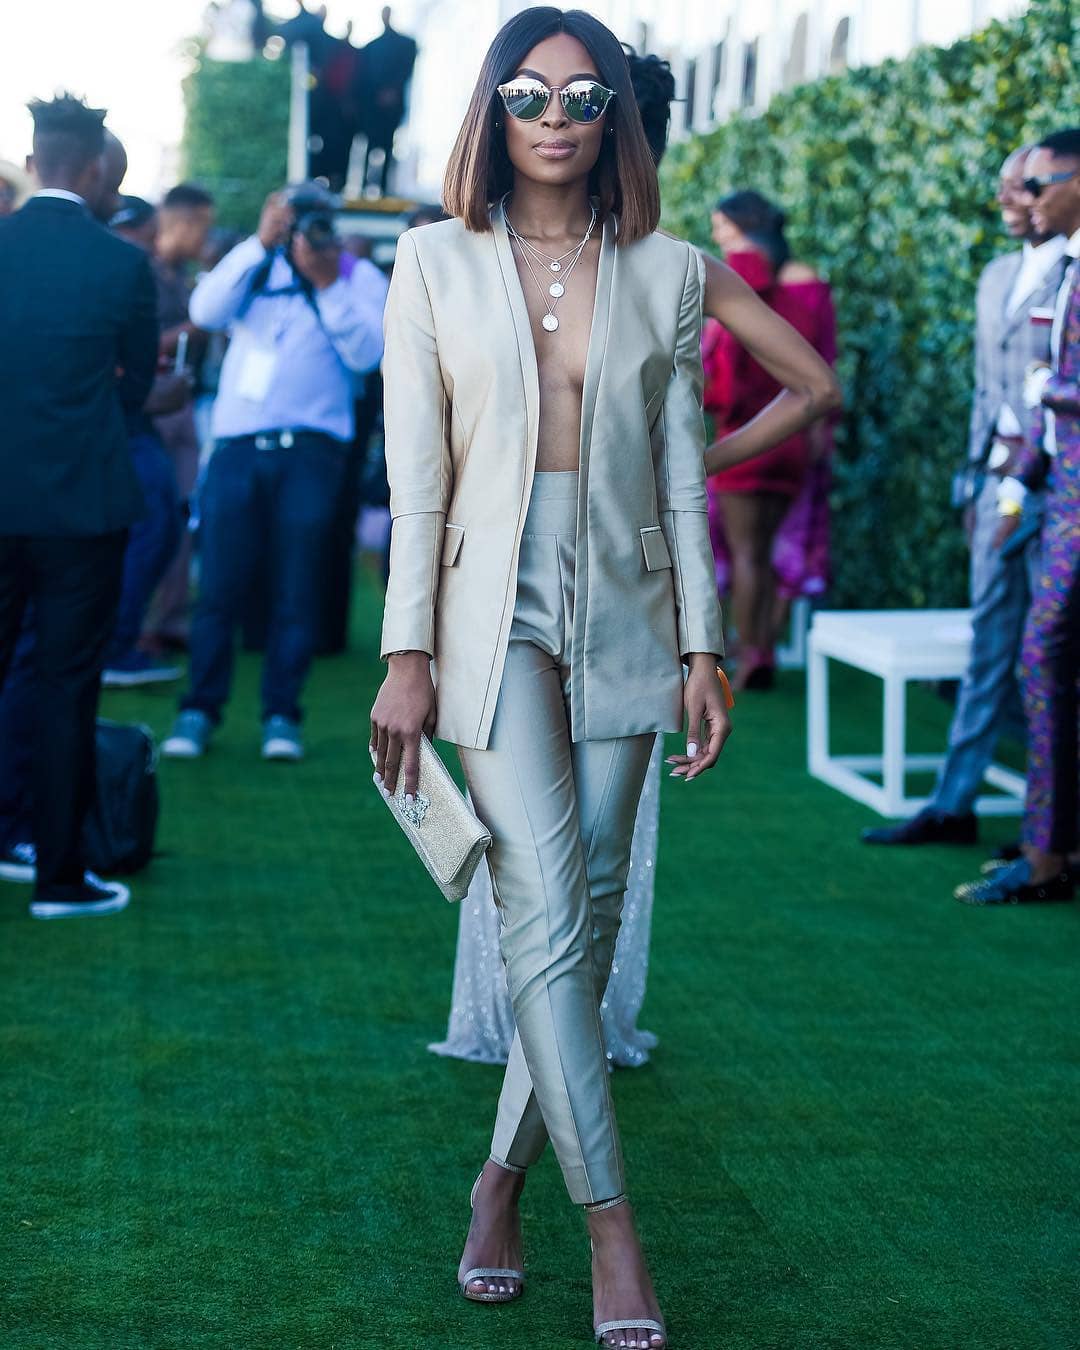 #VDJ2018:The South African Stars Come Out to Slay at Durban July 2018